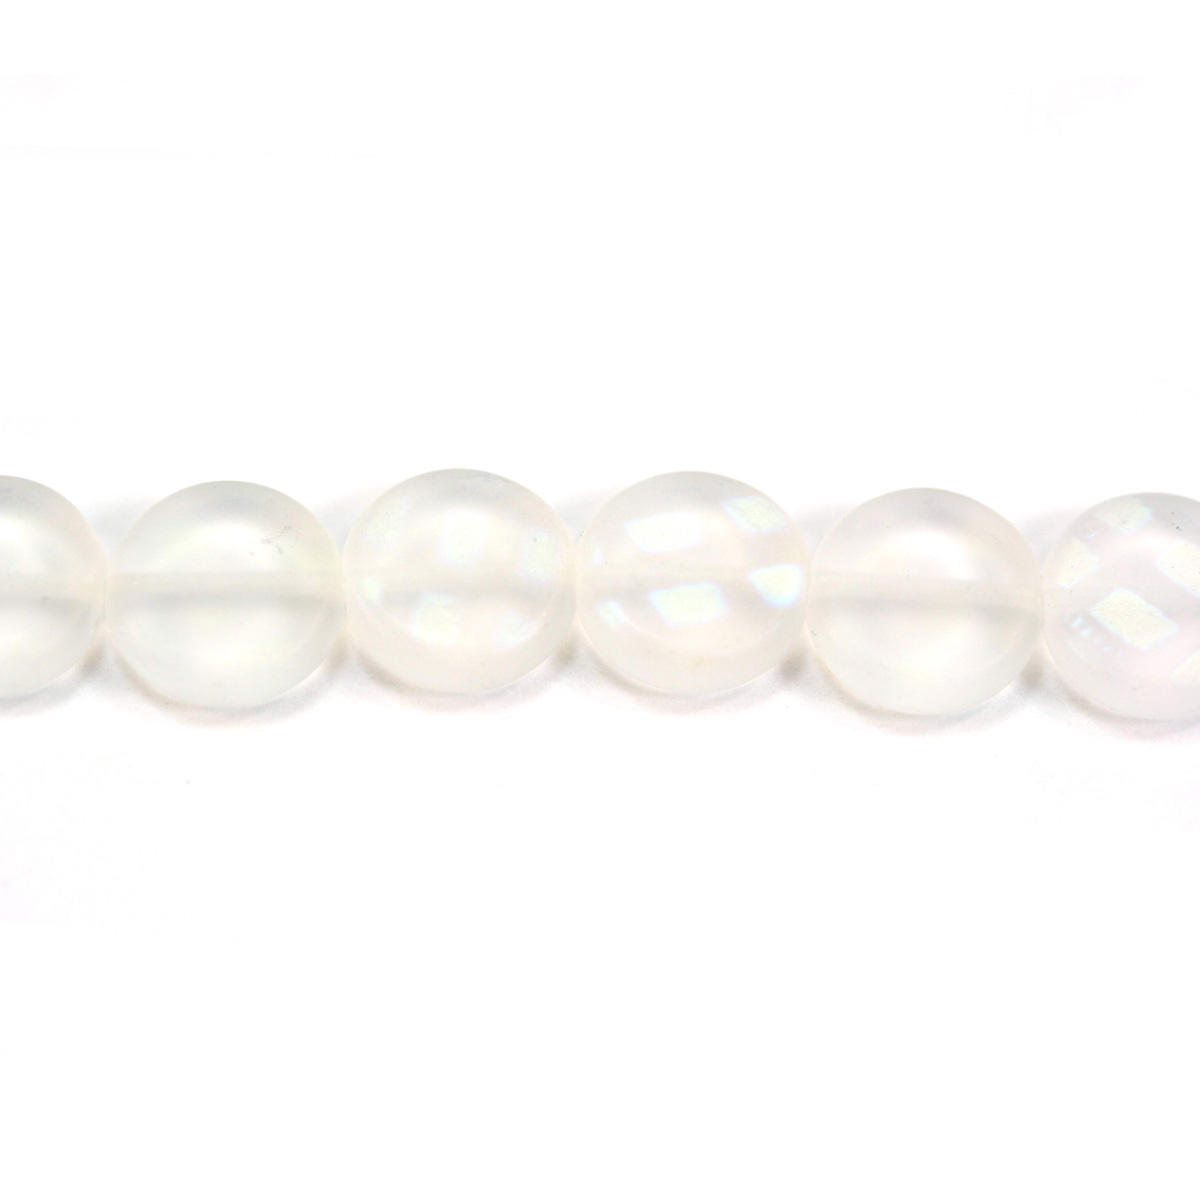 Clear Frosted Patterned Disc Bead String